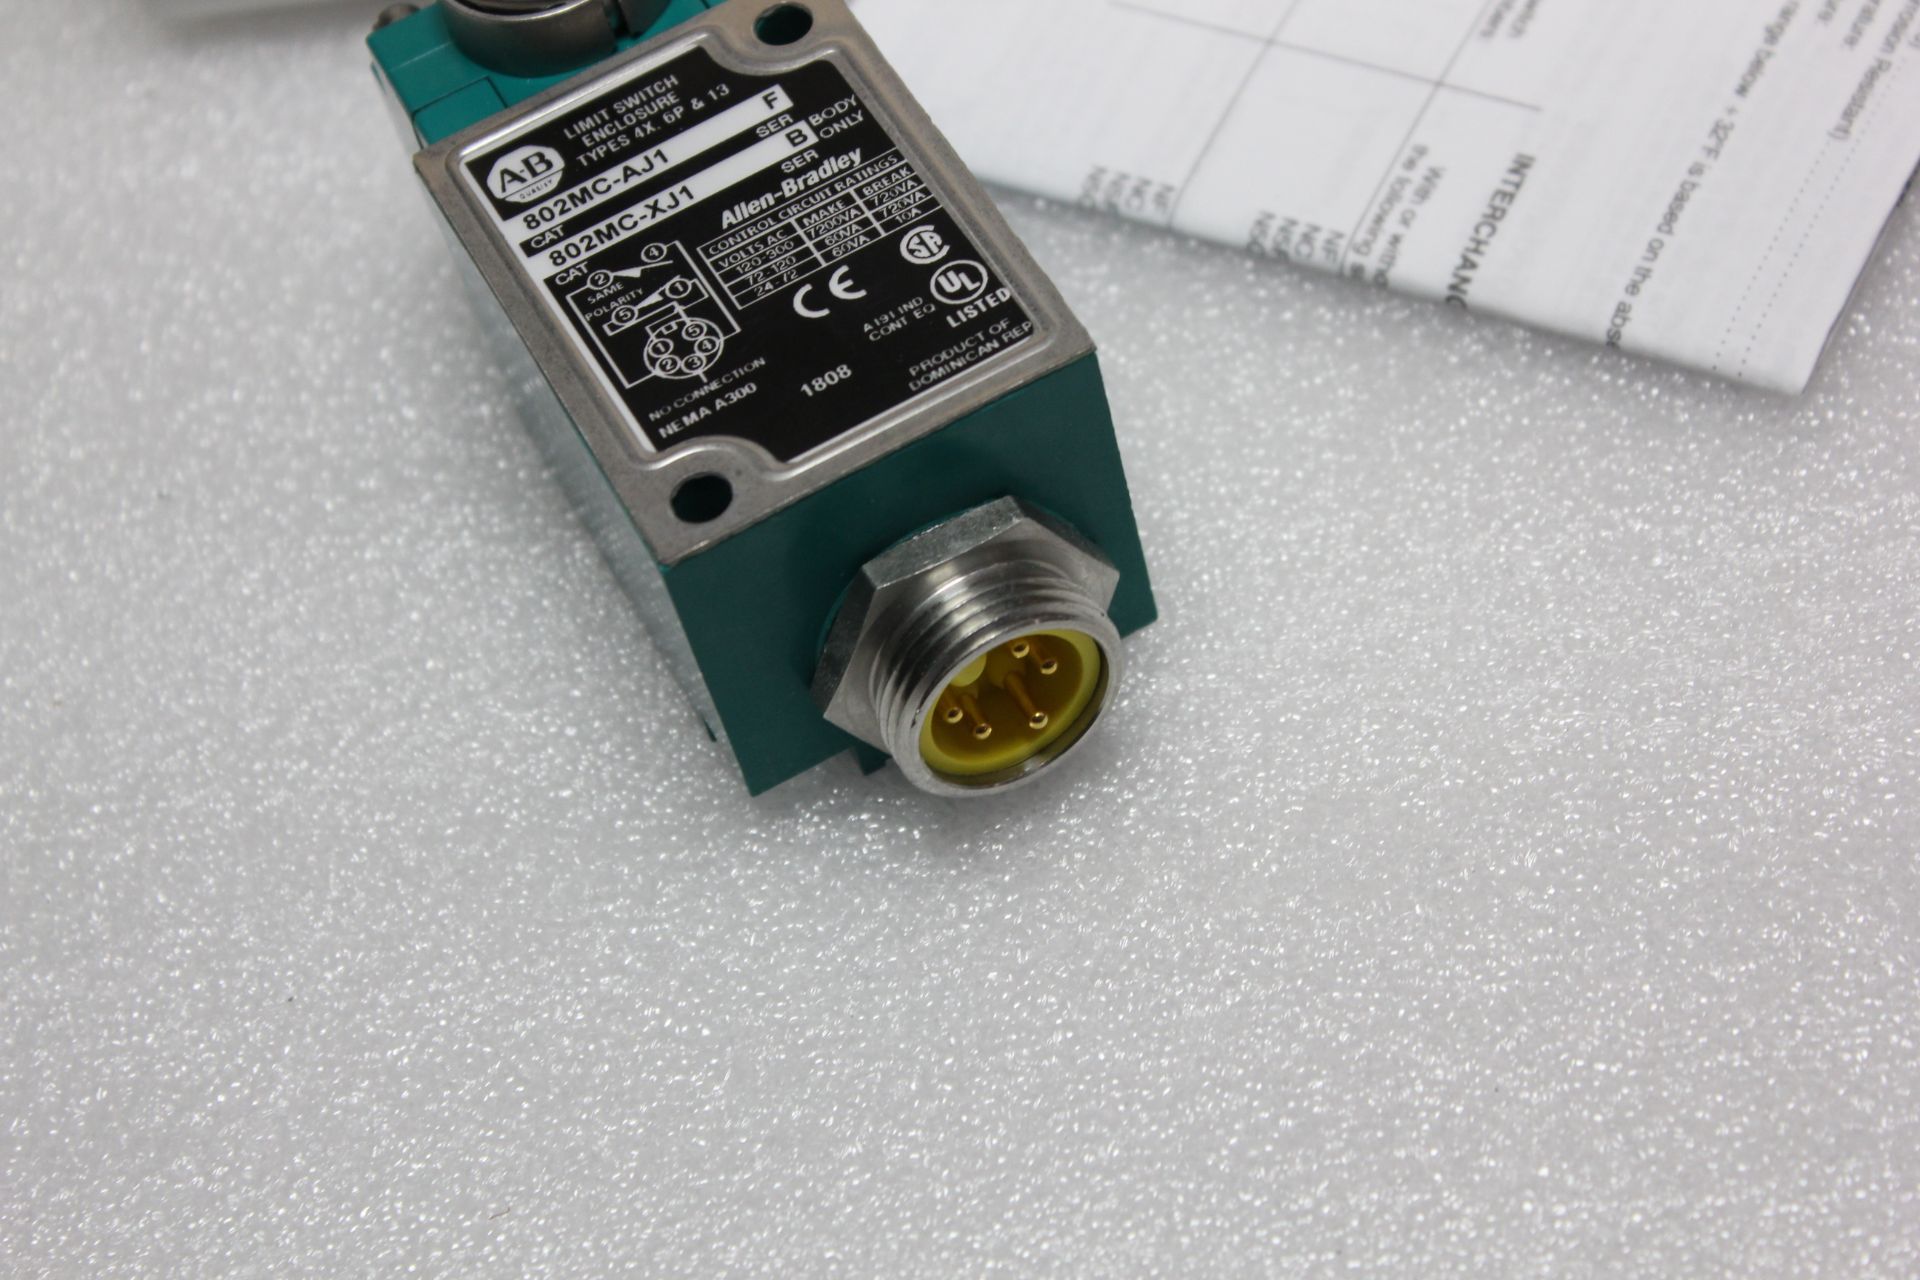 NEW ALLEN BRADLEY CORROSION RESISTANT LIMIT SWITCH - Image 5 of 5